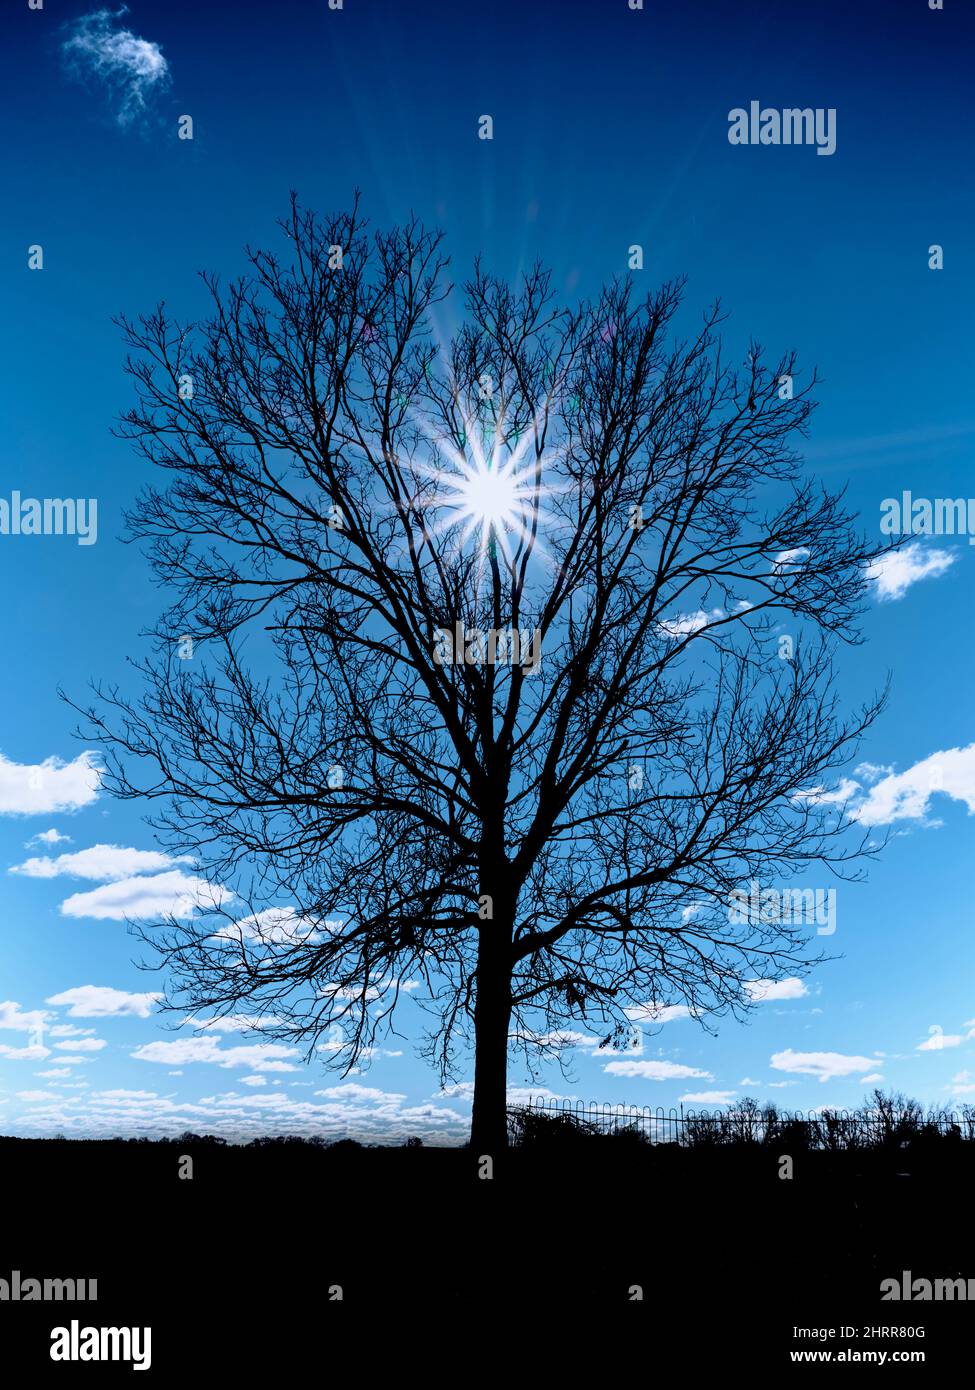 Cold winter tree silhouette with dark blue sky against a starburst sun. Stock Photo